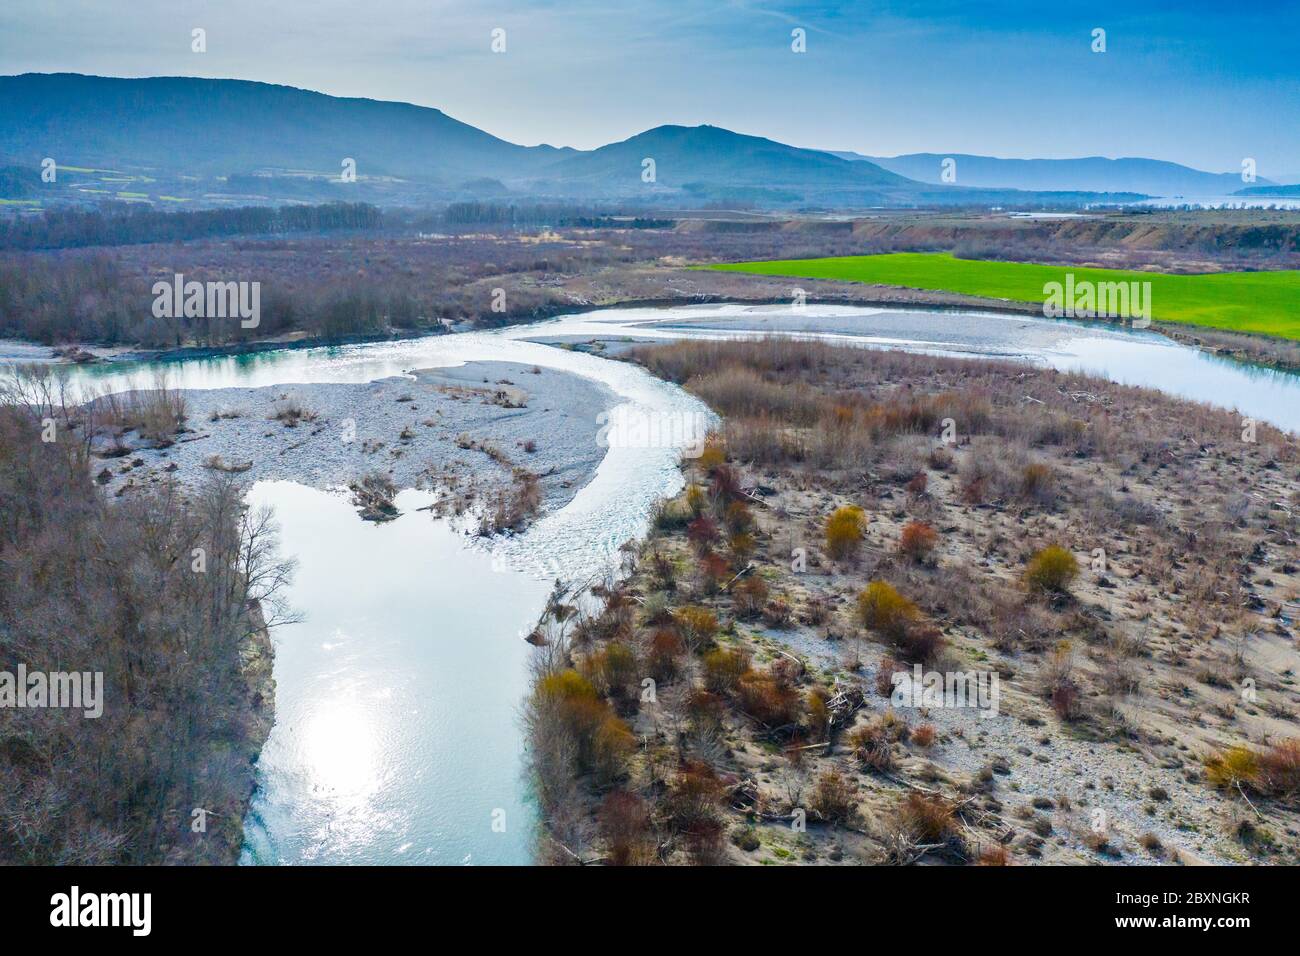 Aerial view of a river and sediments. Stock Photo